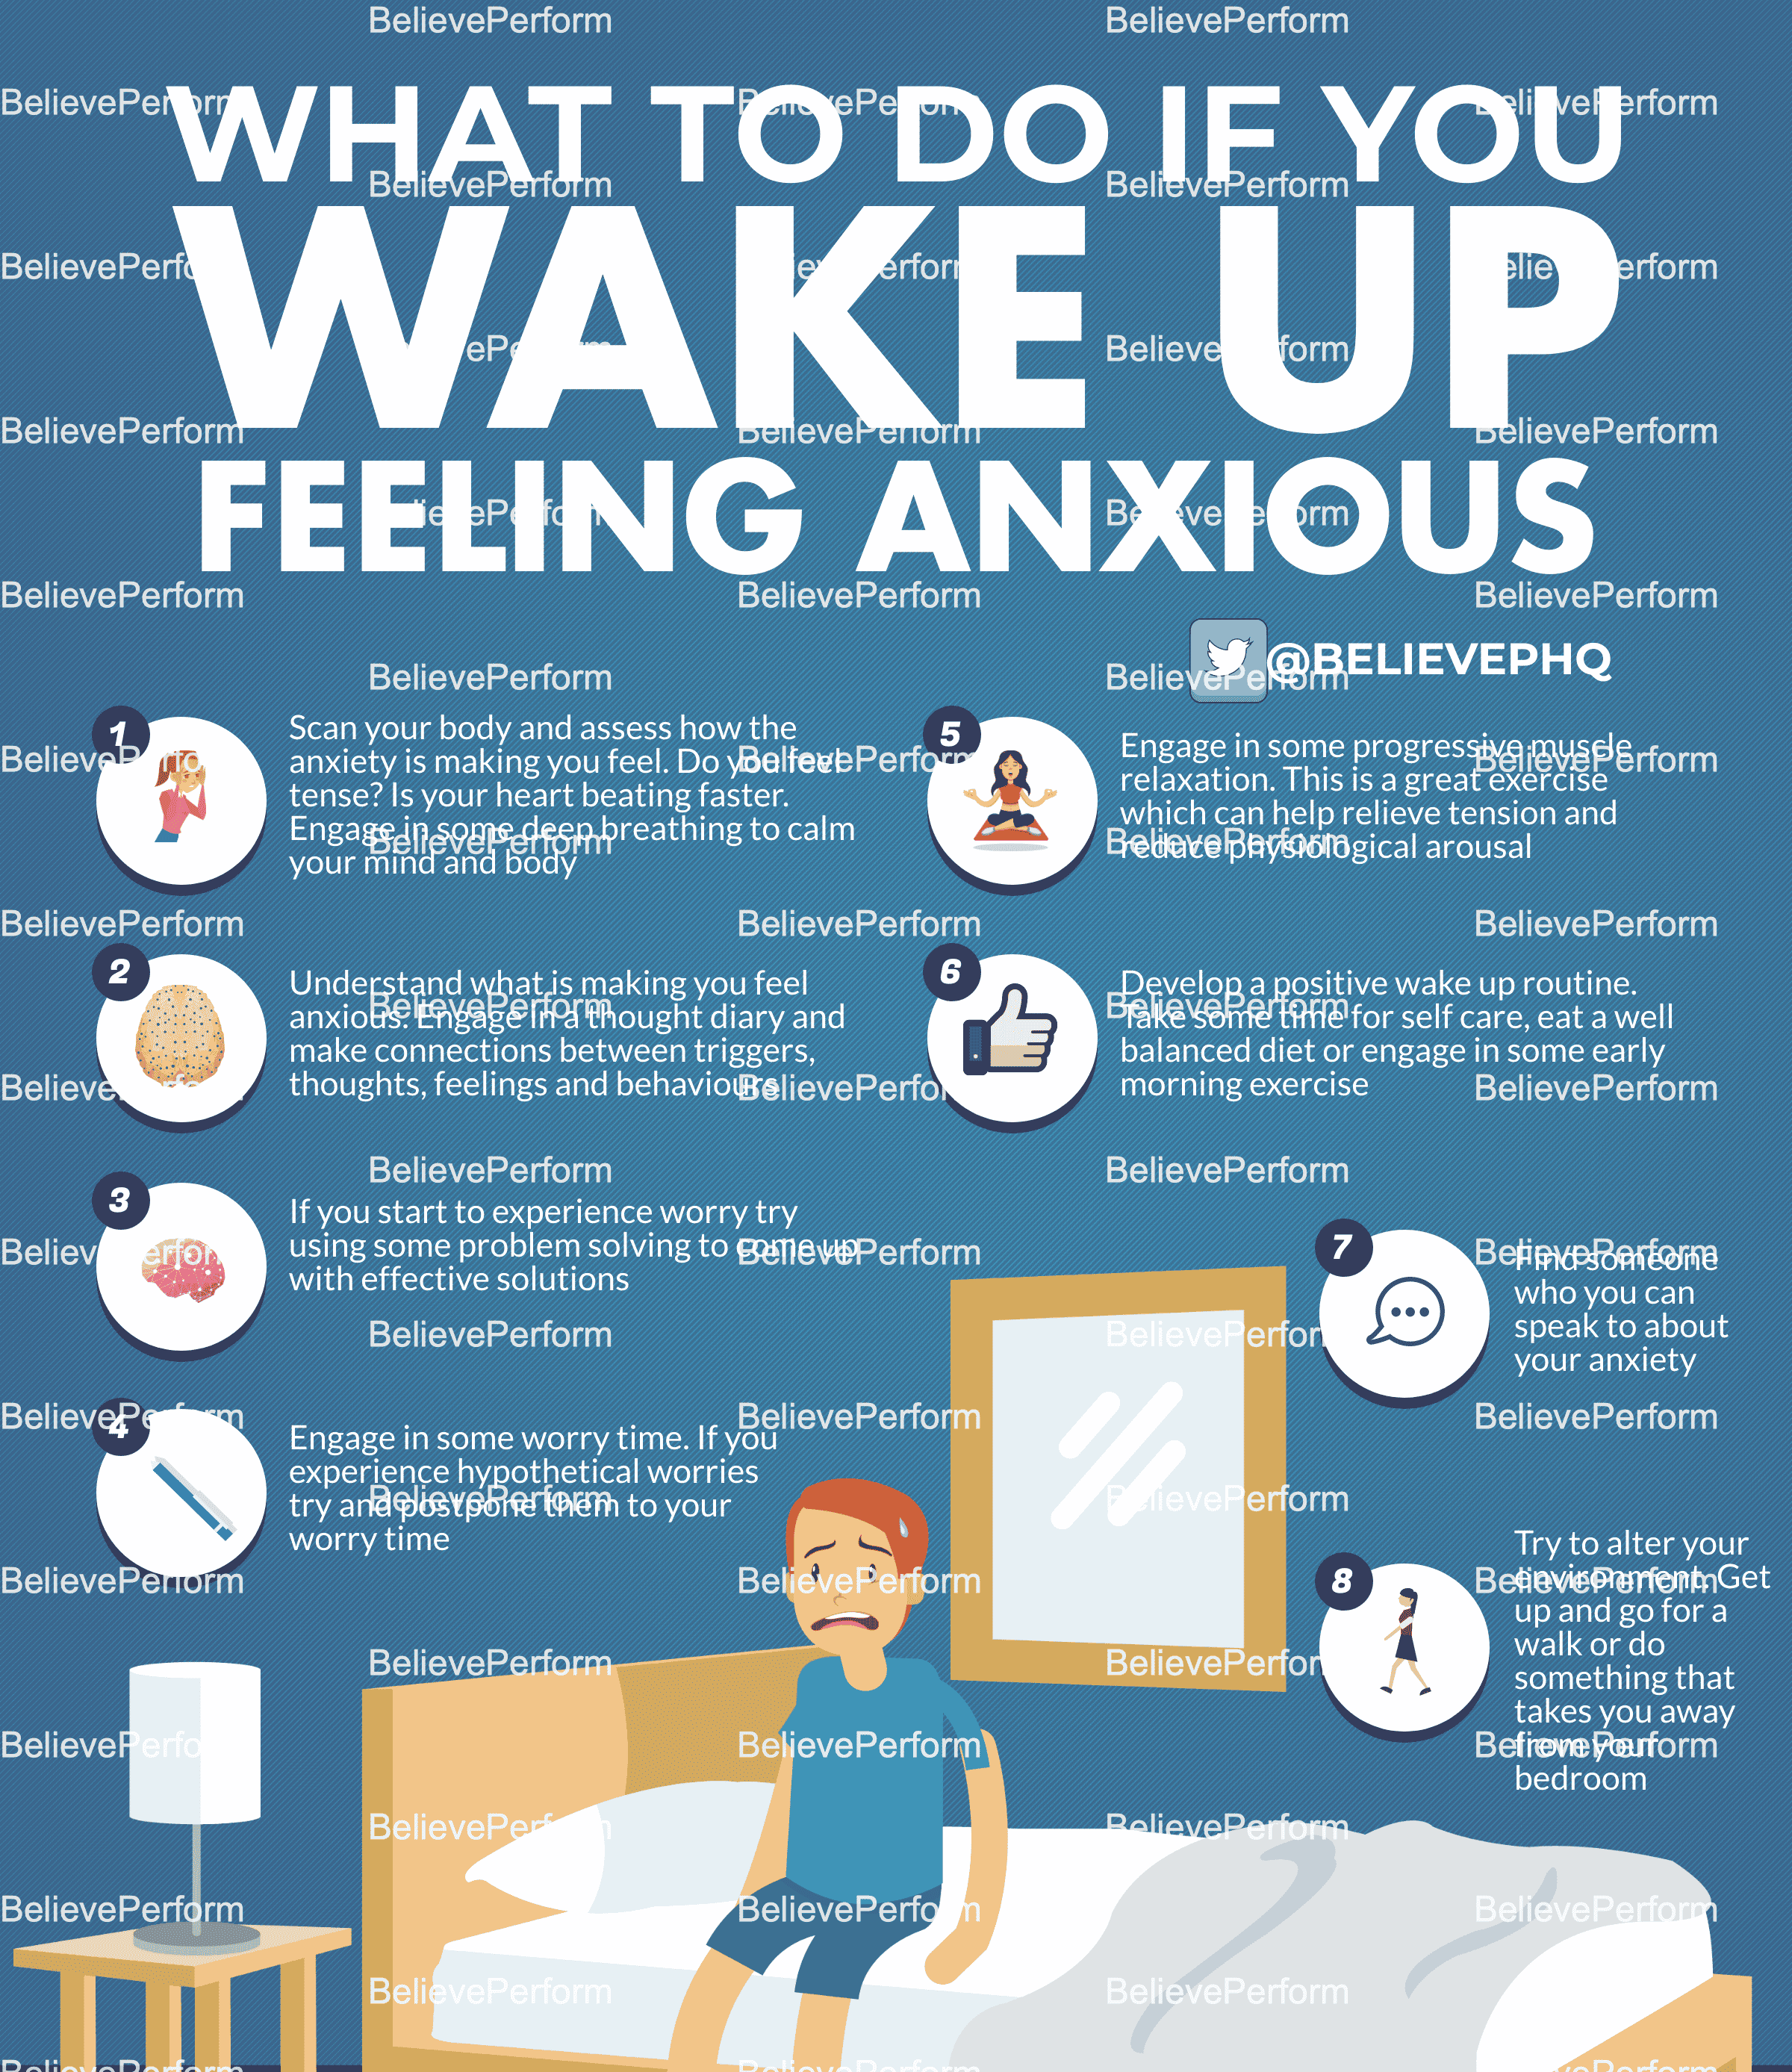 What to do if you wake up feeling anxious